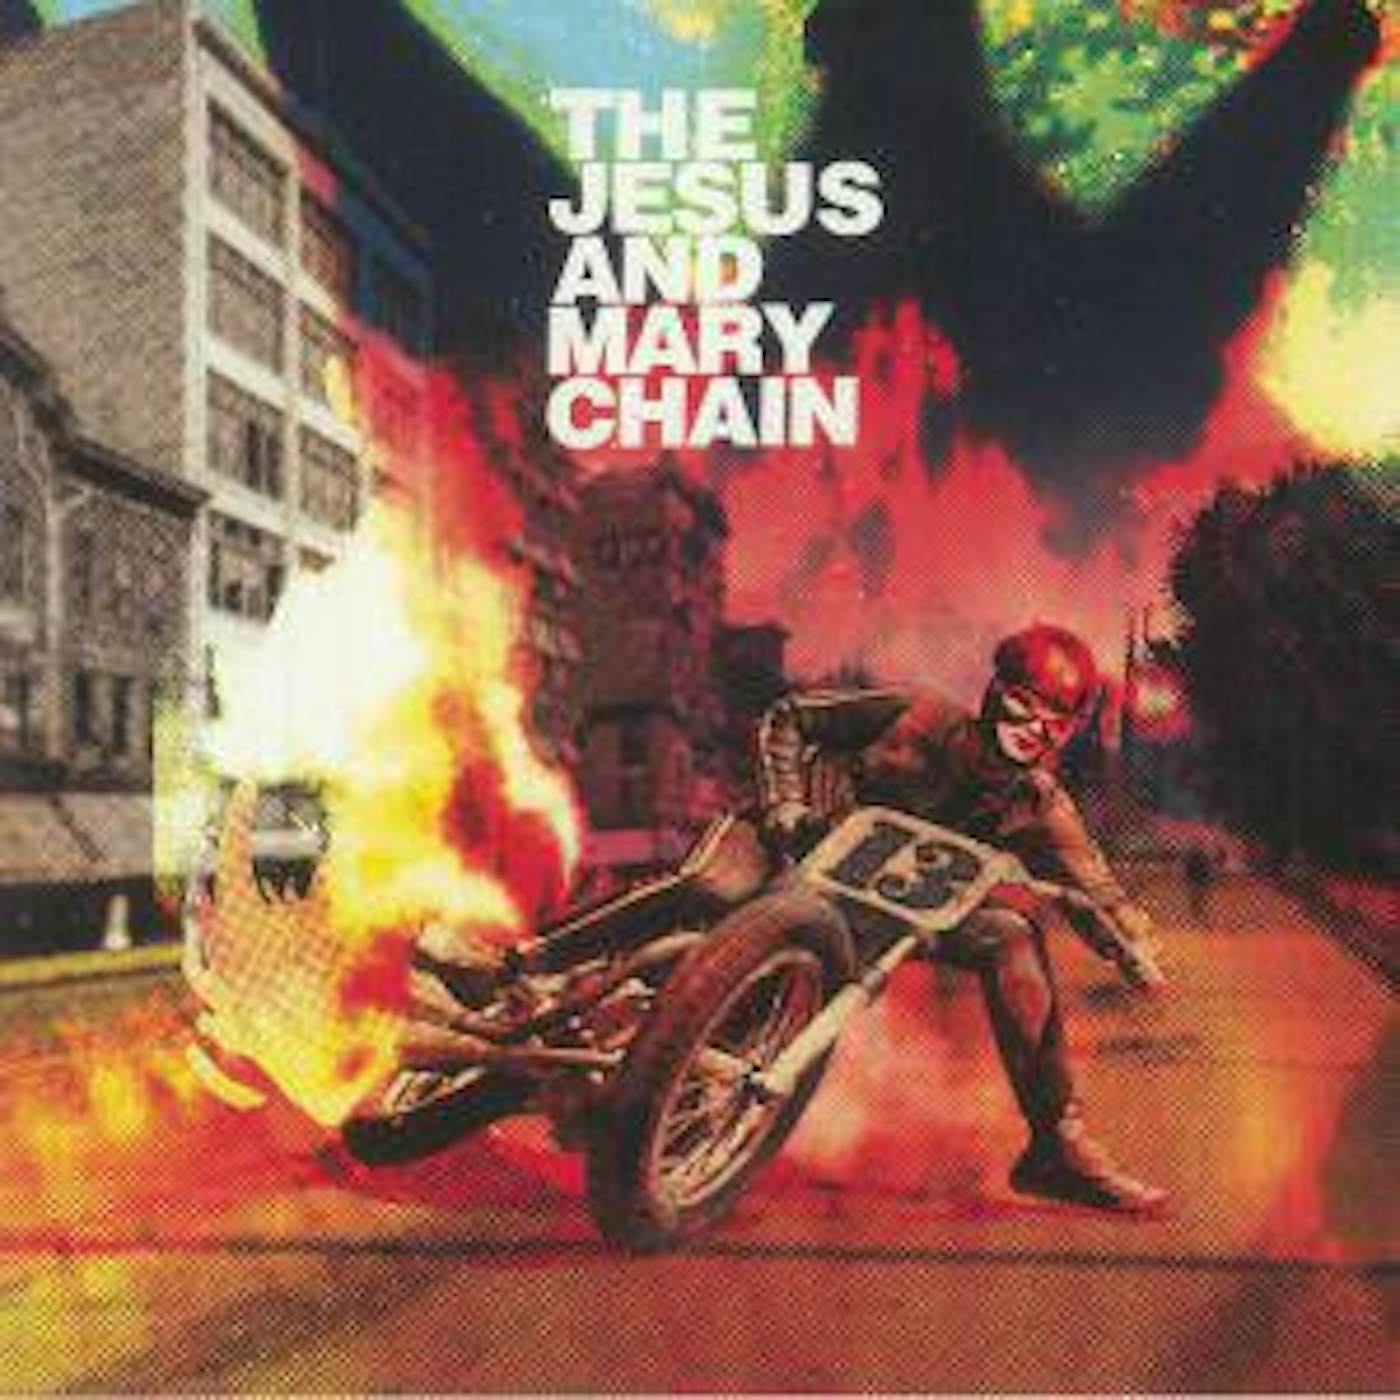 The Jesus and Mary Chain LIVE AT THE FOX THEATRE DETROIT 10/22/18 Vinyl Record